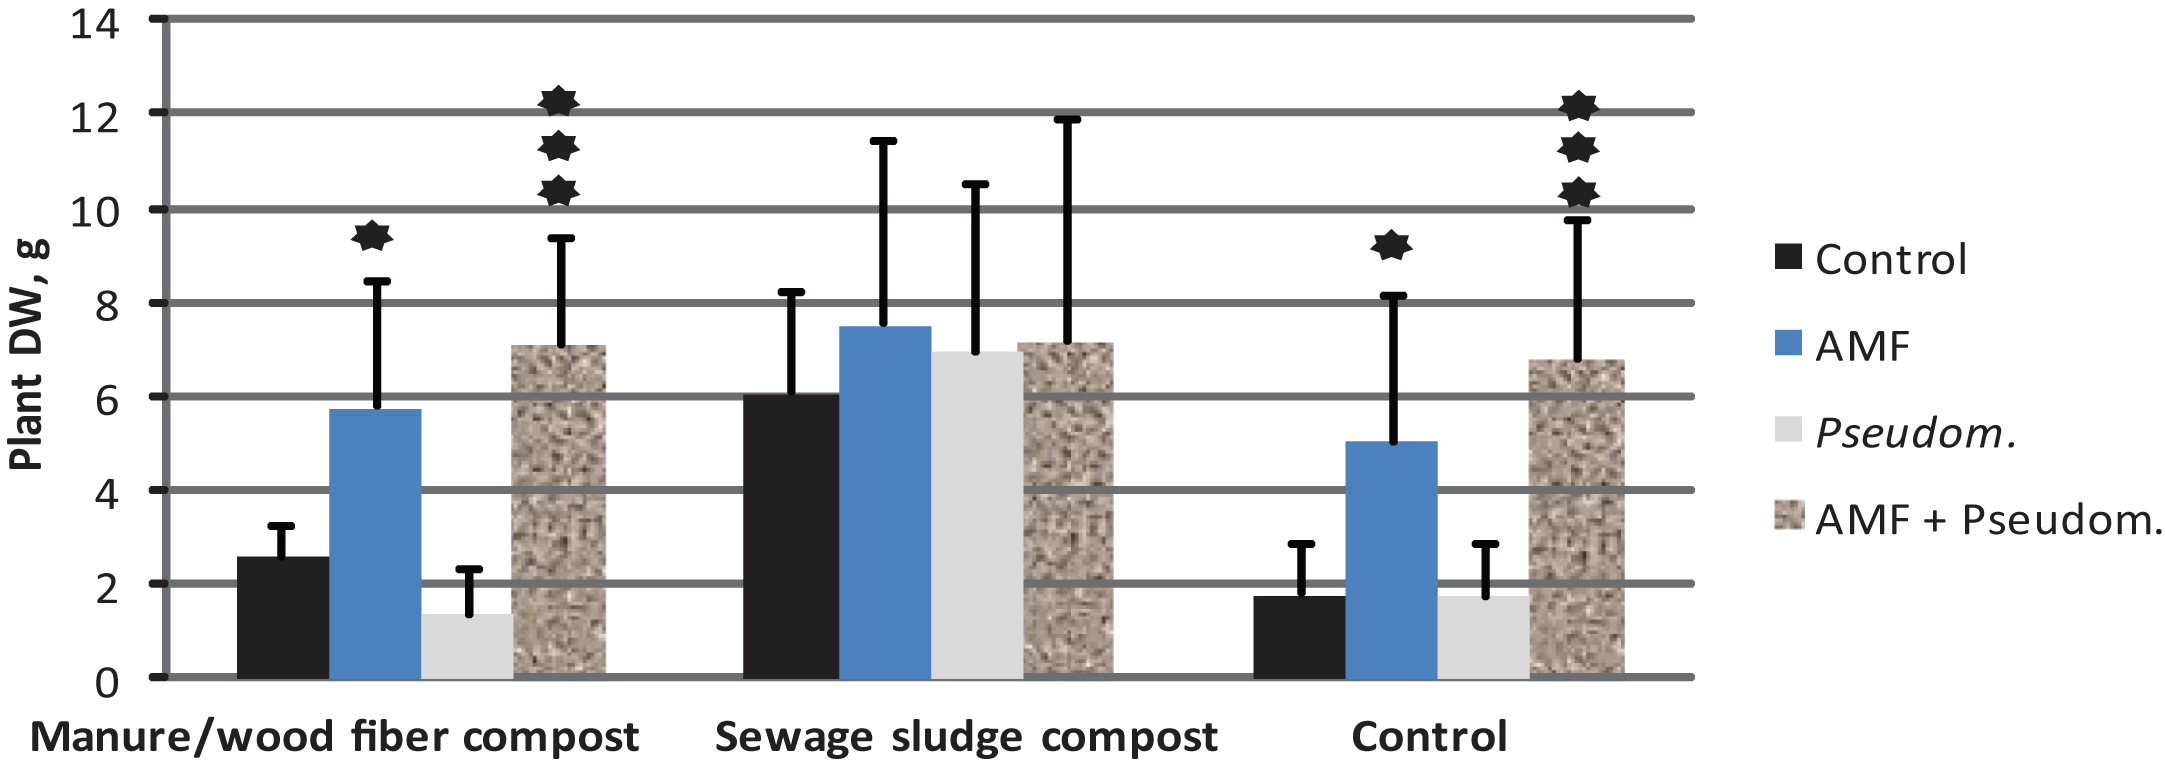 The impact of microbial inoculation on 
strawberry shoot dry weight (mean+std; N = 12) on two growing media containing compost and in the 
control without compost ((experiment 3, see Tables 1 & 2). The results are means of Phytophthora-inoculated and non-inoculated. ★= significantly different from control treatment at p <  0.05, ★★★= significantly different from control treatment at p <  0.001.